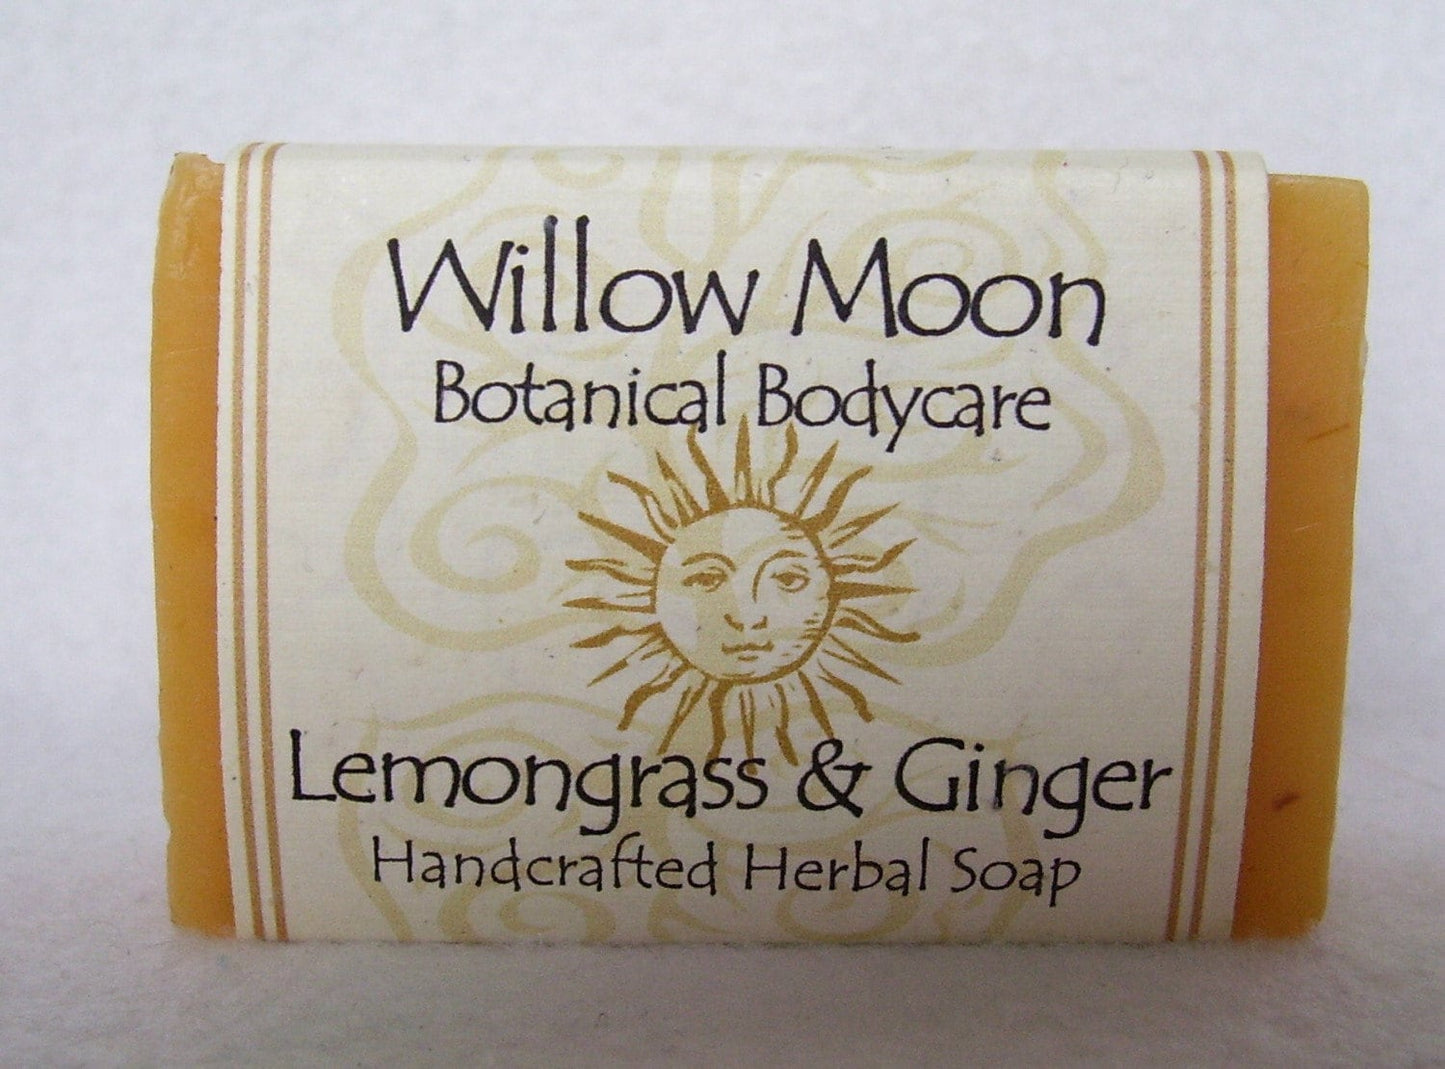 Handcrafted Avocado oil soap  Lemongrass and Ginger, natural, moisturizing, refreshing / Willow Moon